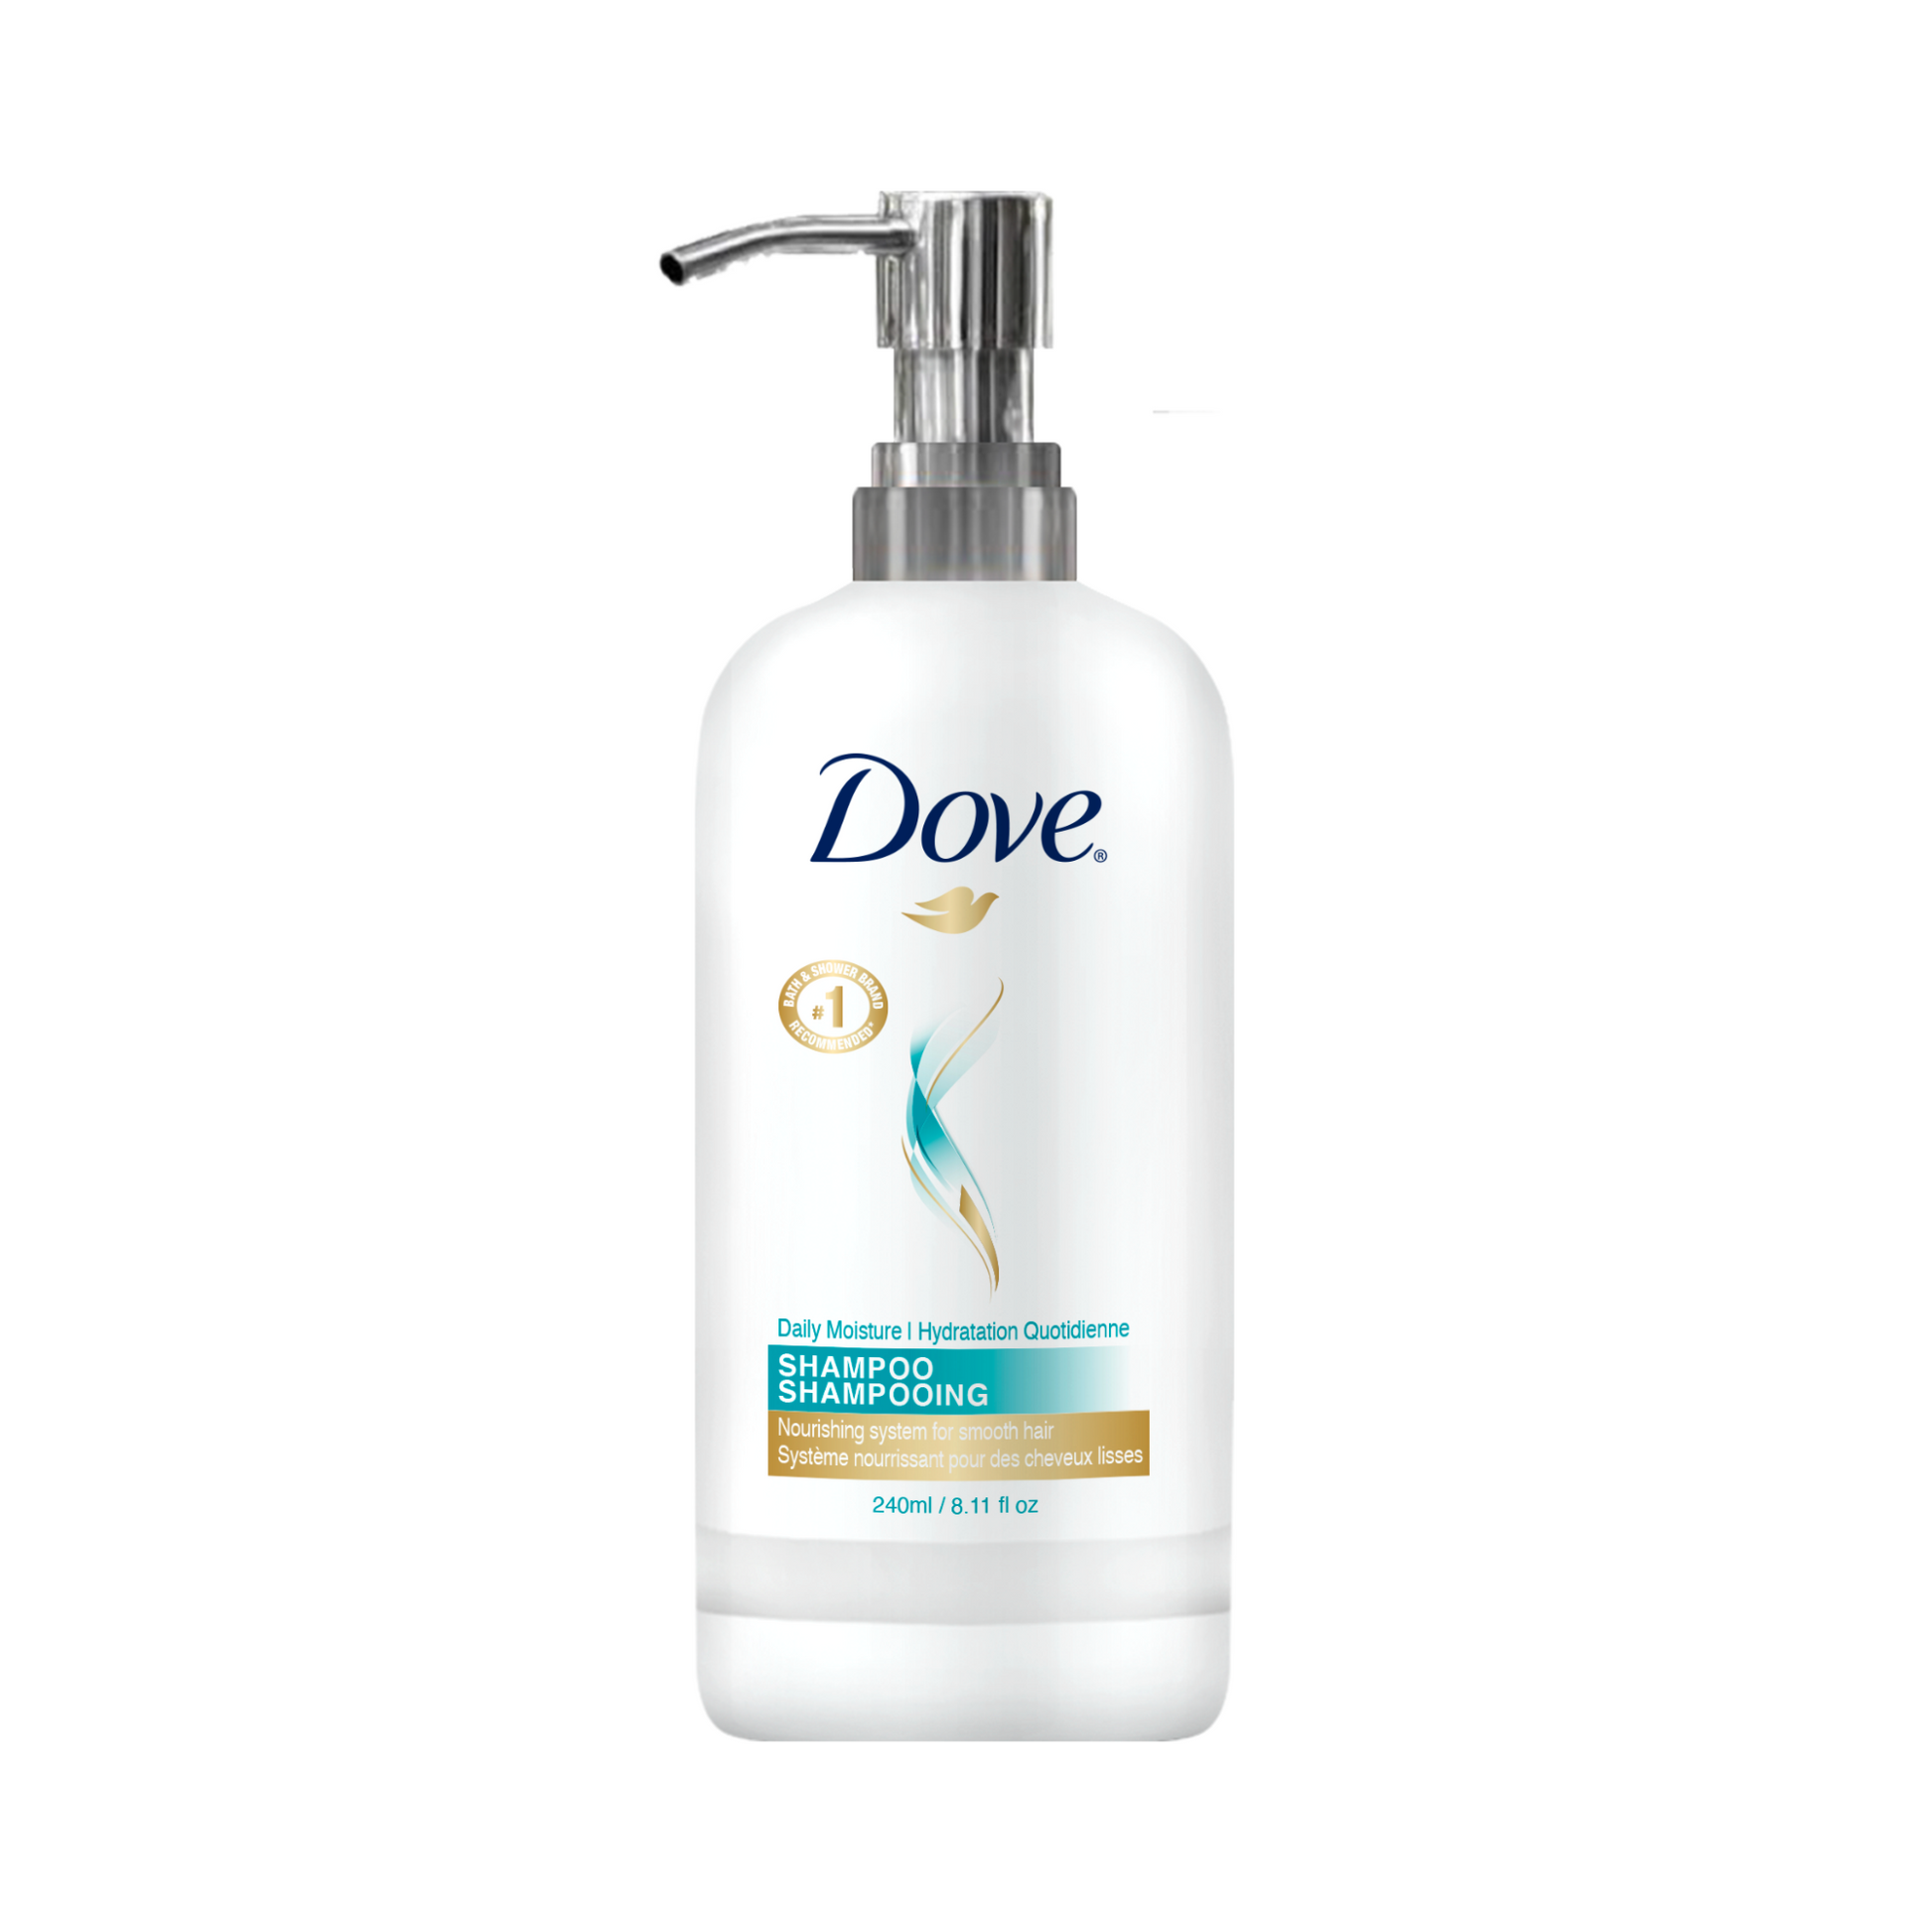 Dove Daily Moisture Shampoo bottle - 240ml - Elevate Their Stay: Dove Professional Daily Moisture Shampoo - Premium Hair Care for Remarkably Smooth and Revitalized Hair - Shop Now At Canadian Hotel Supplies